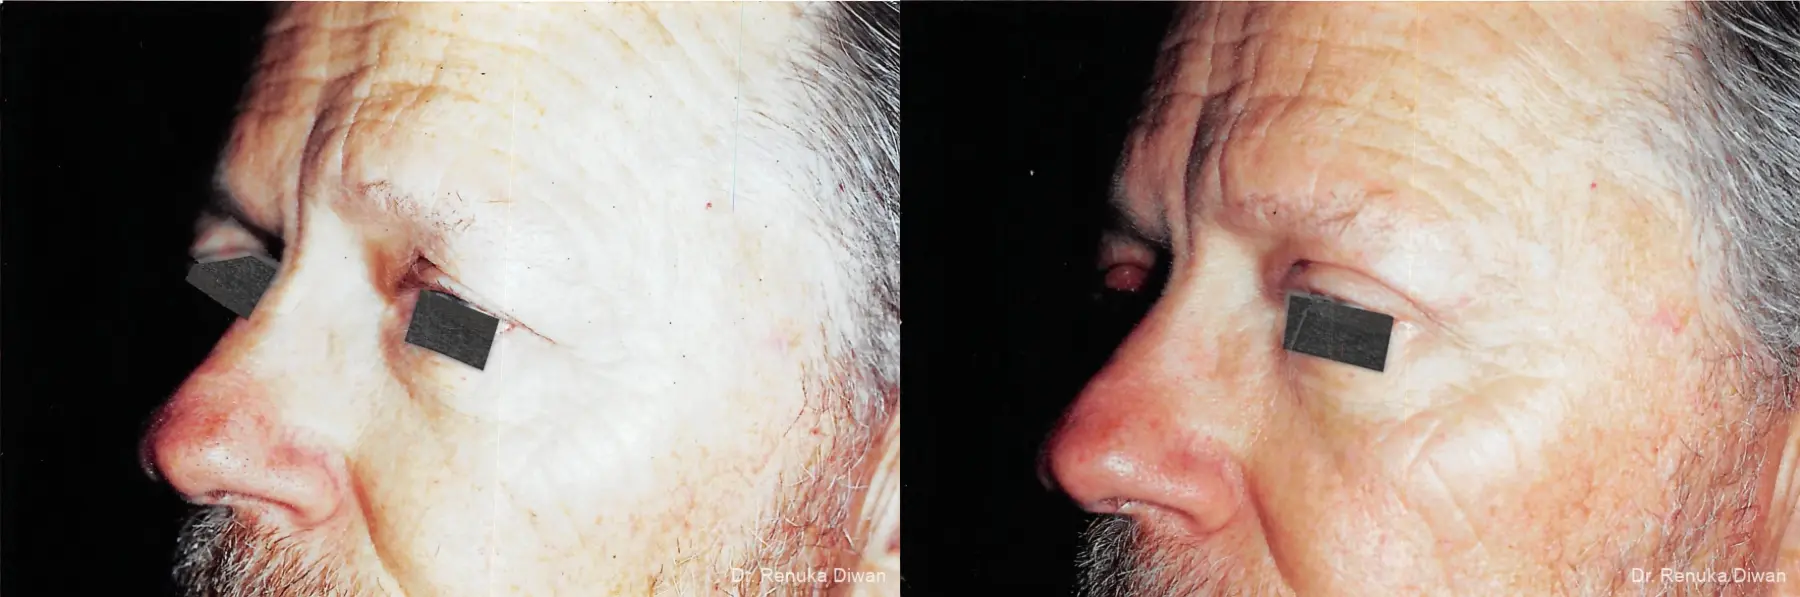 Blepharoplasty-for-men: Patient 1 - Before and After  